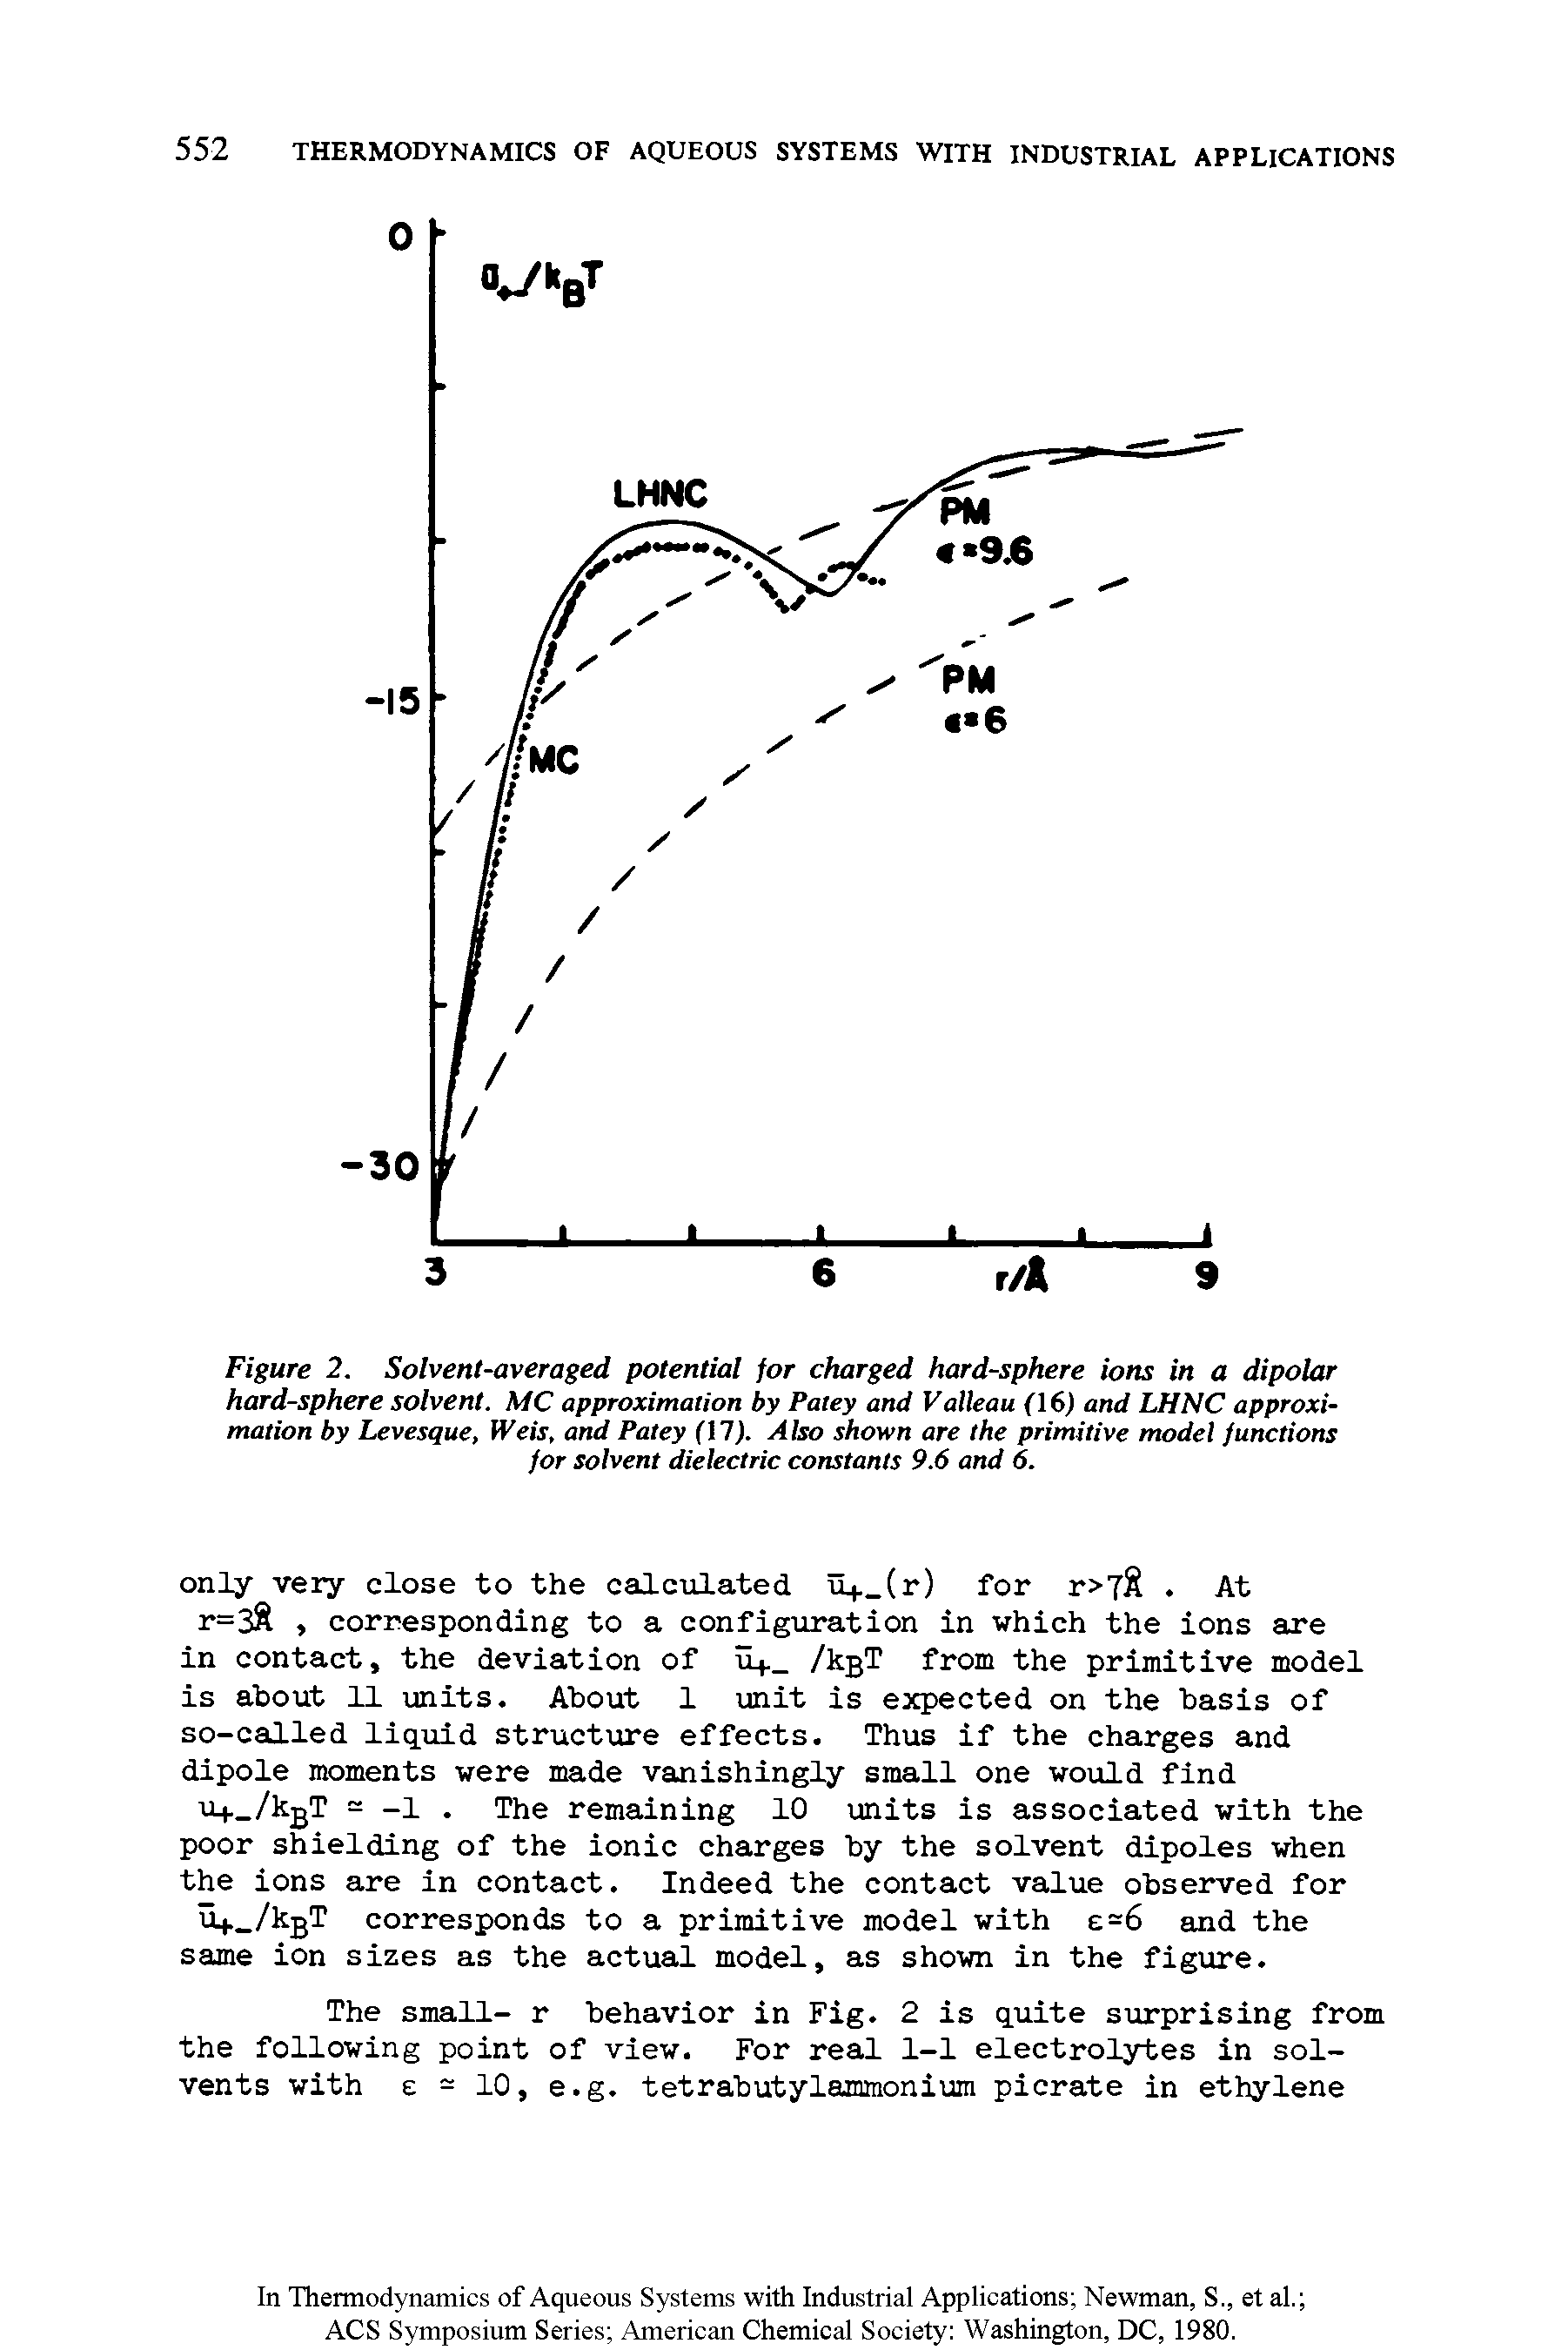 Figure 2. Solvent-averaged potential for charged hard-sphere ions in a dipolar hard-sphere solvent. MC approximation by Patey and Valleau (16) and LHNC approximation by Levesque, Weis, and Patey (11). Also shown are the primitive model functions for solvent dielectric constants 9.6 and 6.